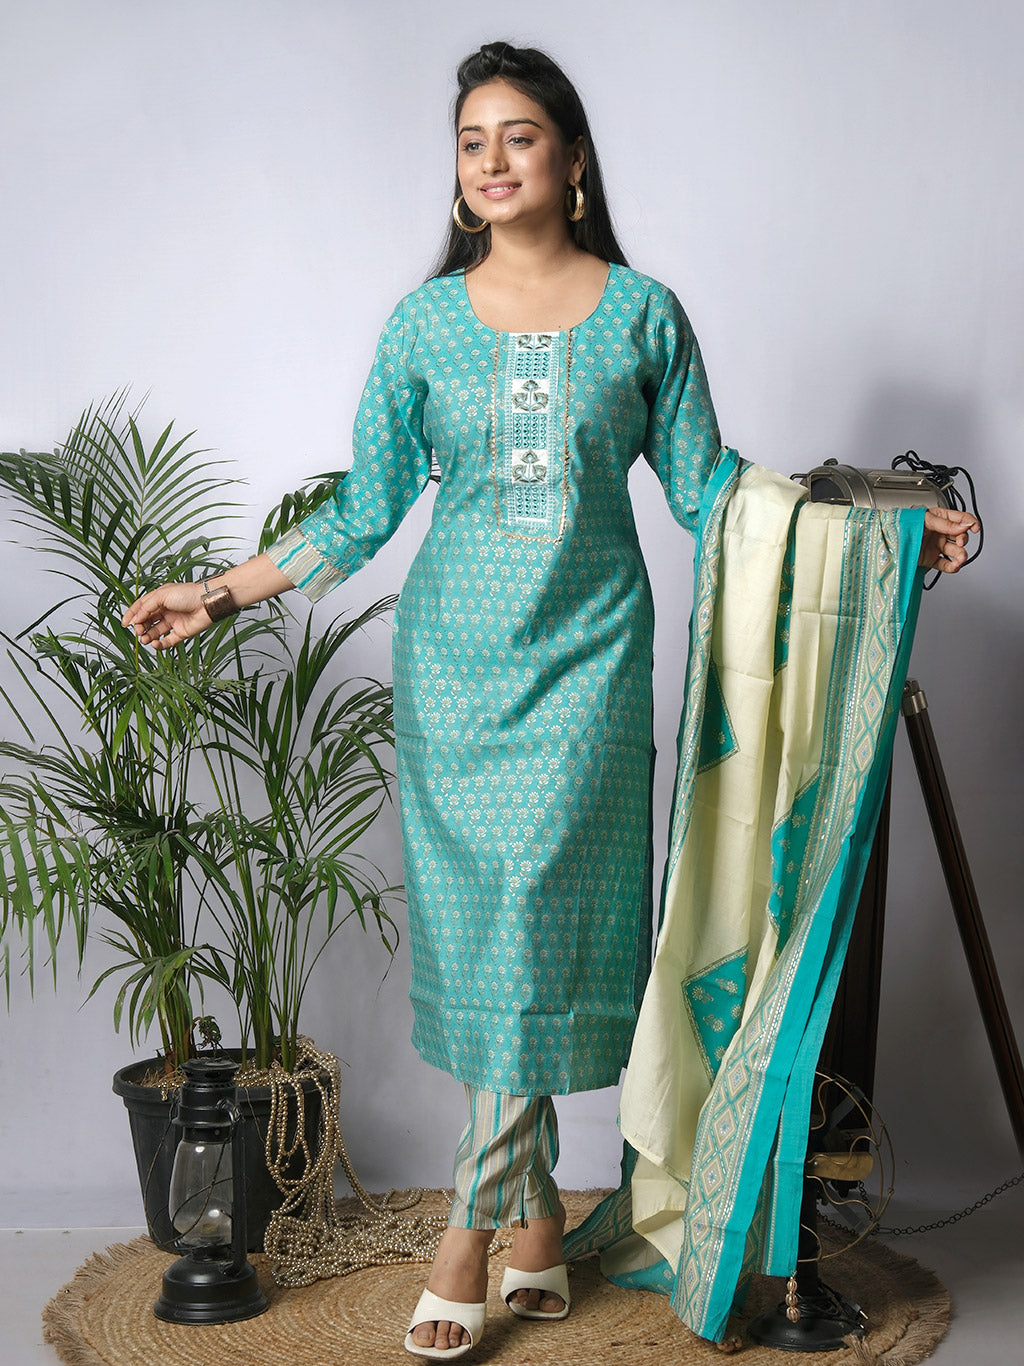 Cotton kurta, pant and dupatta, another side view